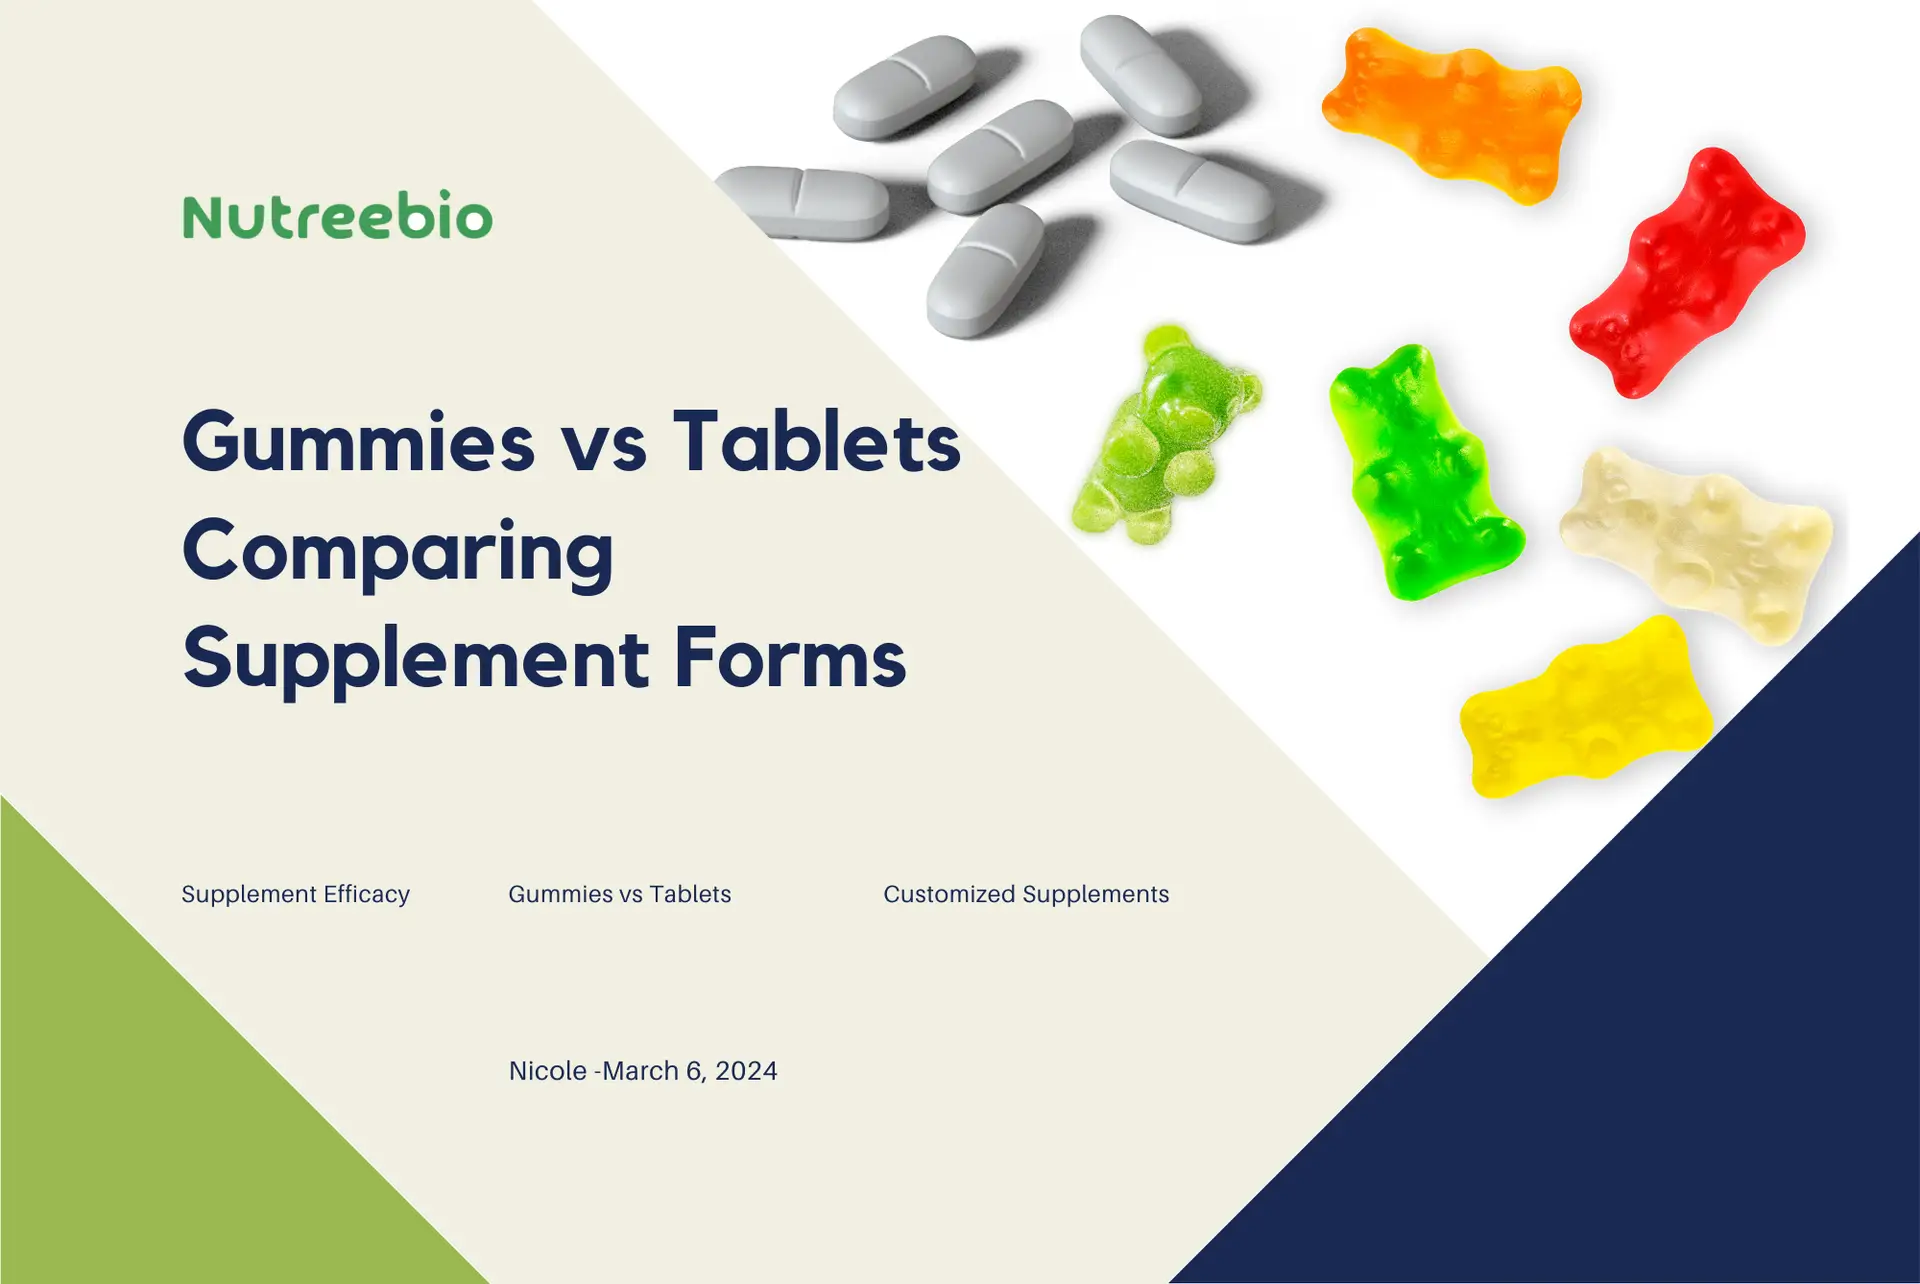 comparing supplement forms the efficacy of gummies vs tablets unveiled